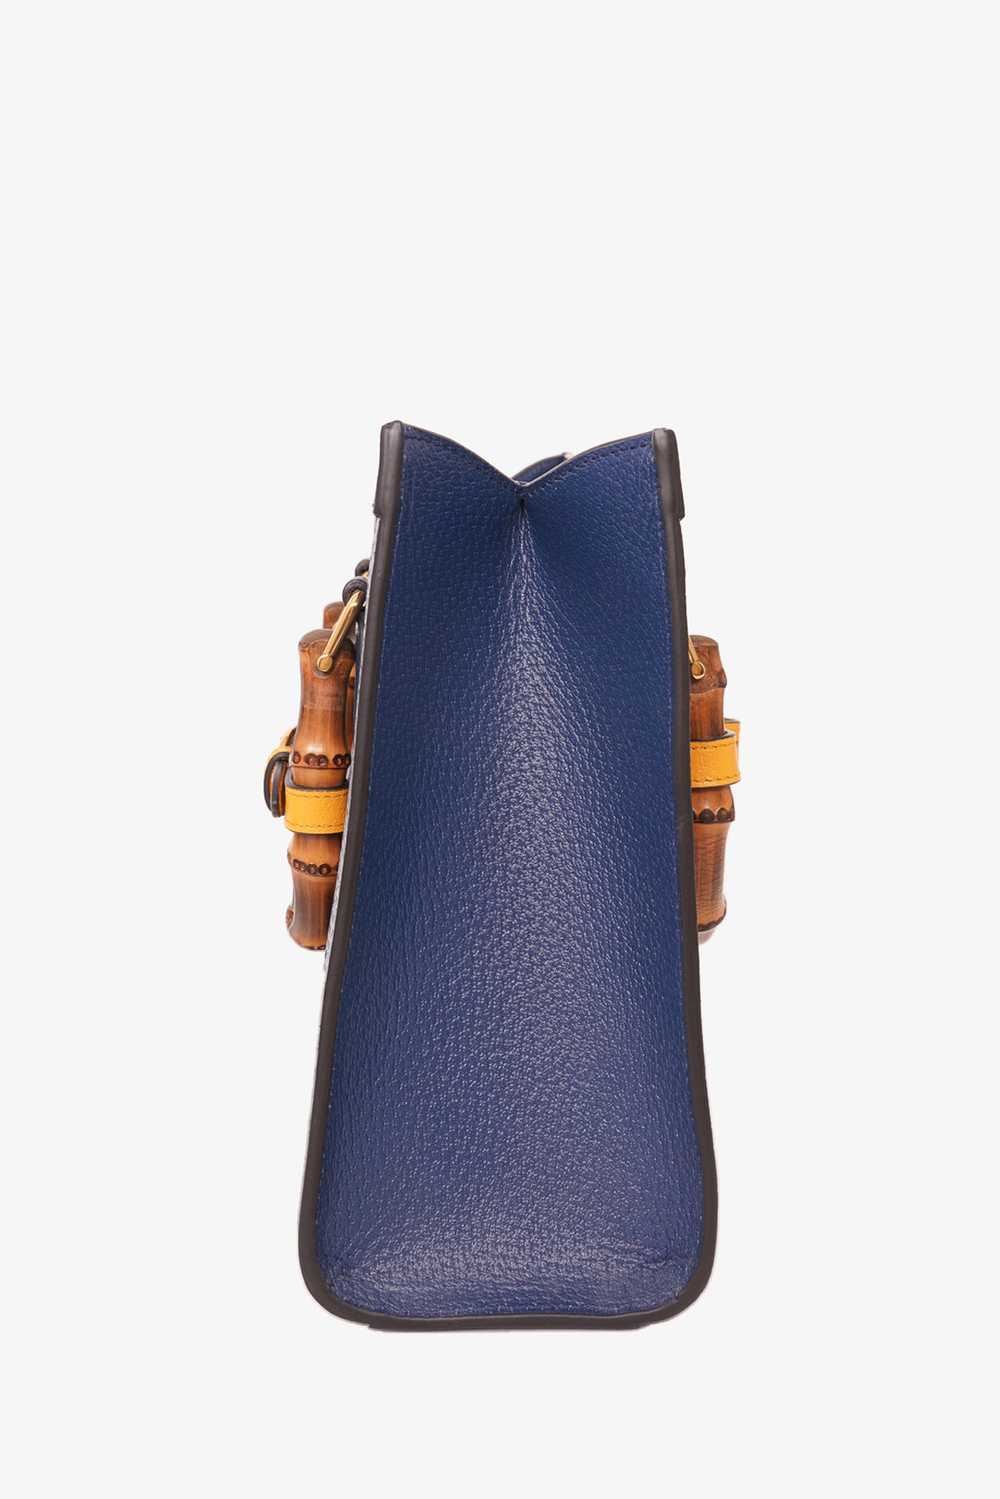 Gucci Blue Leather Diana Small Tote Bag - image 3